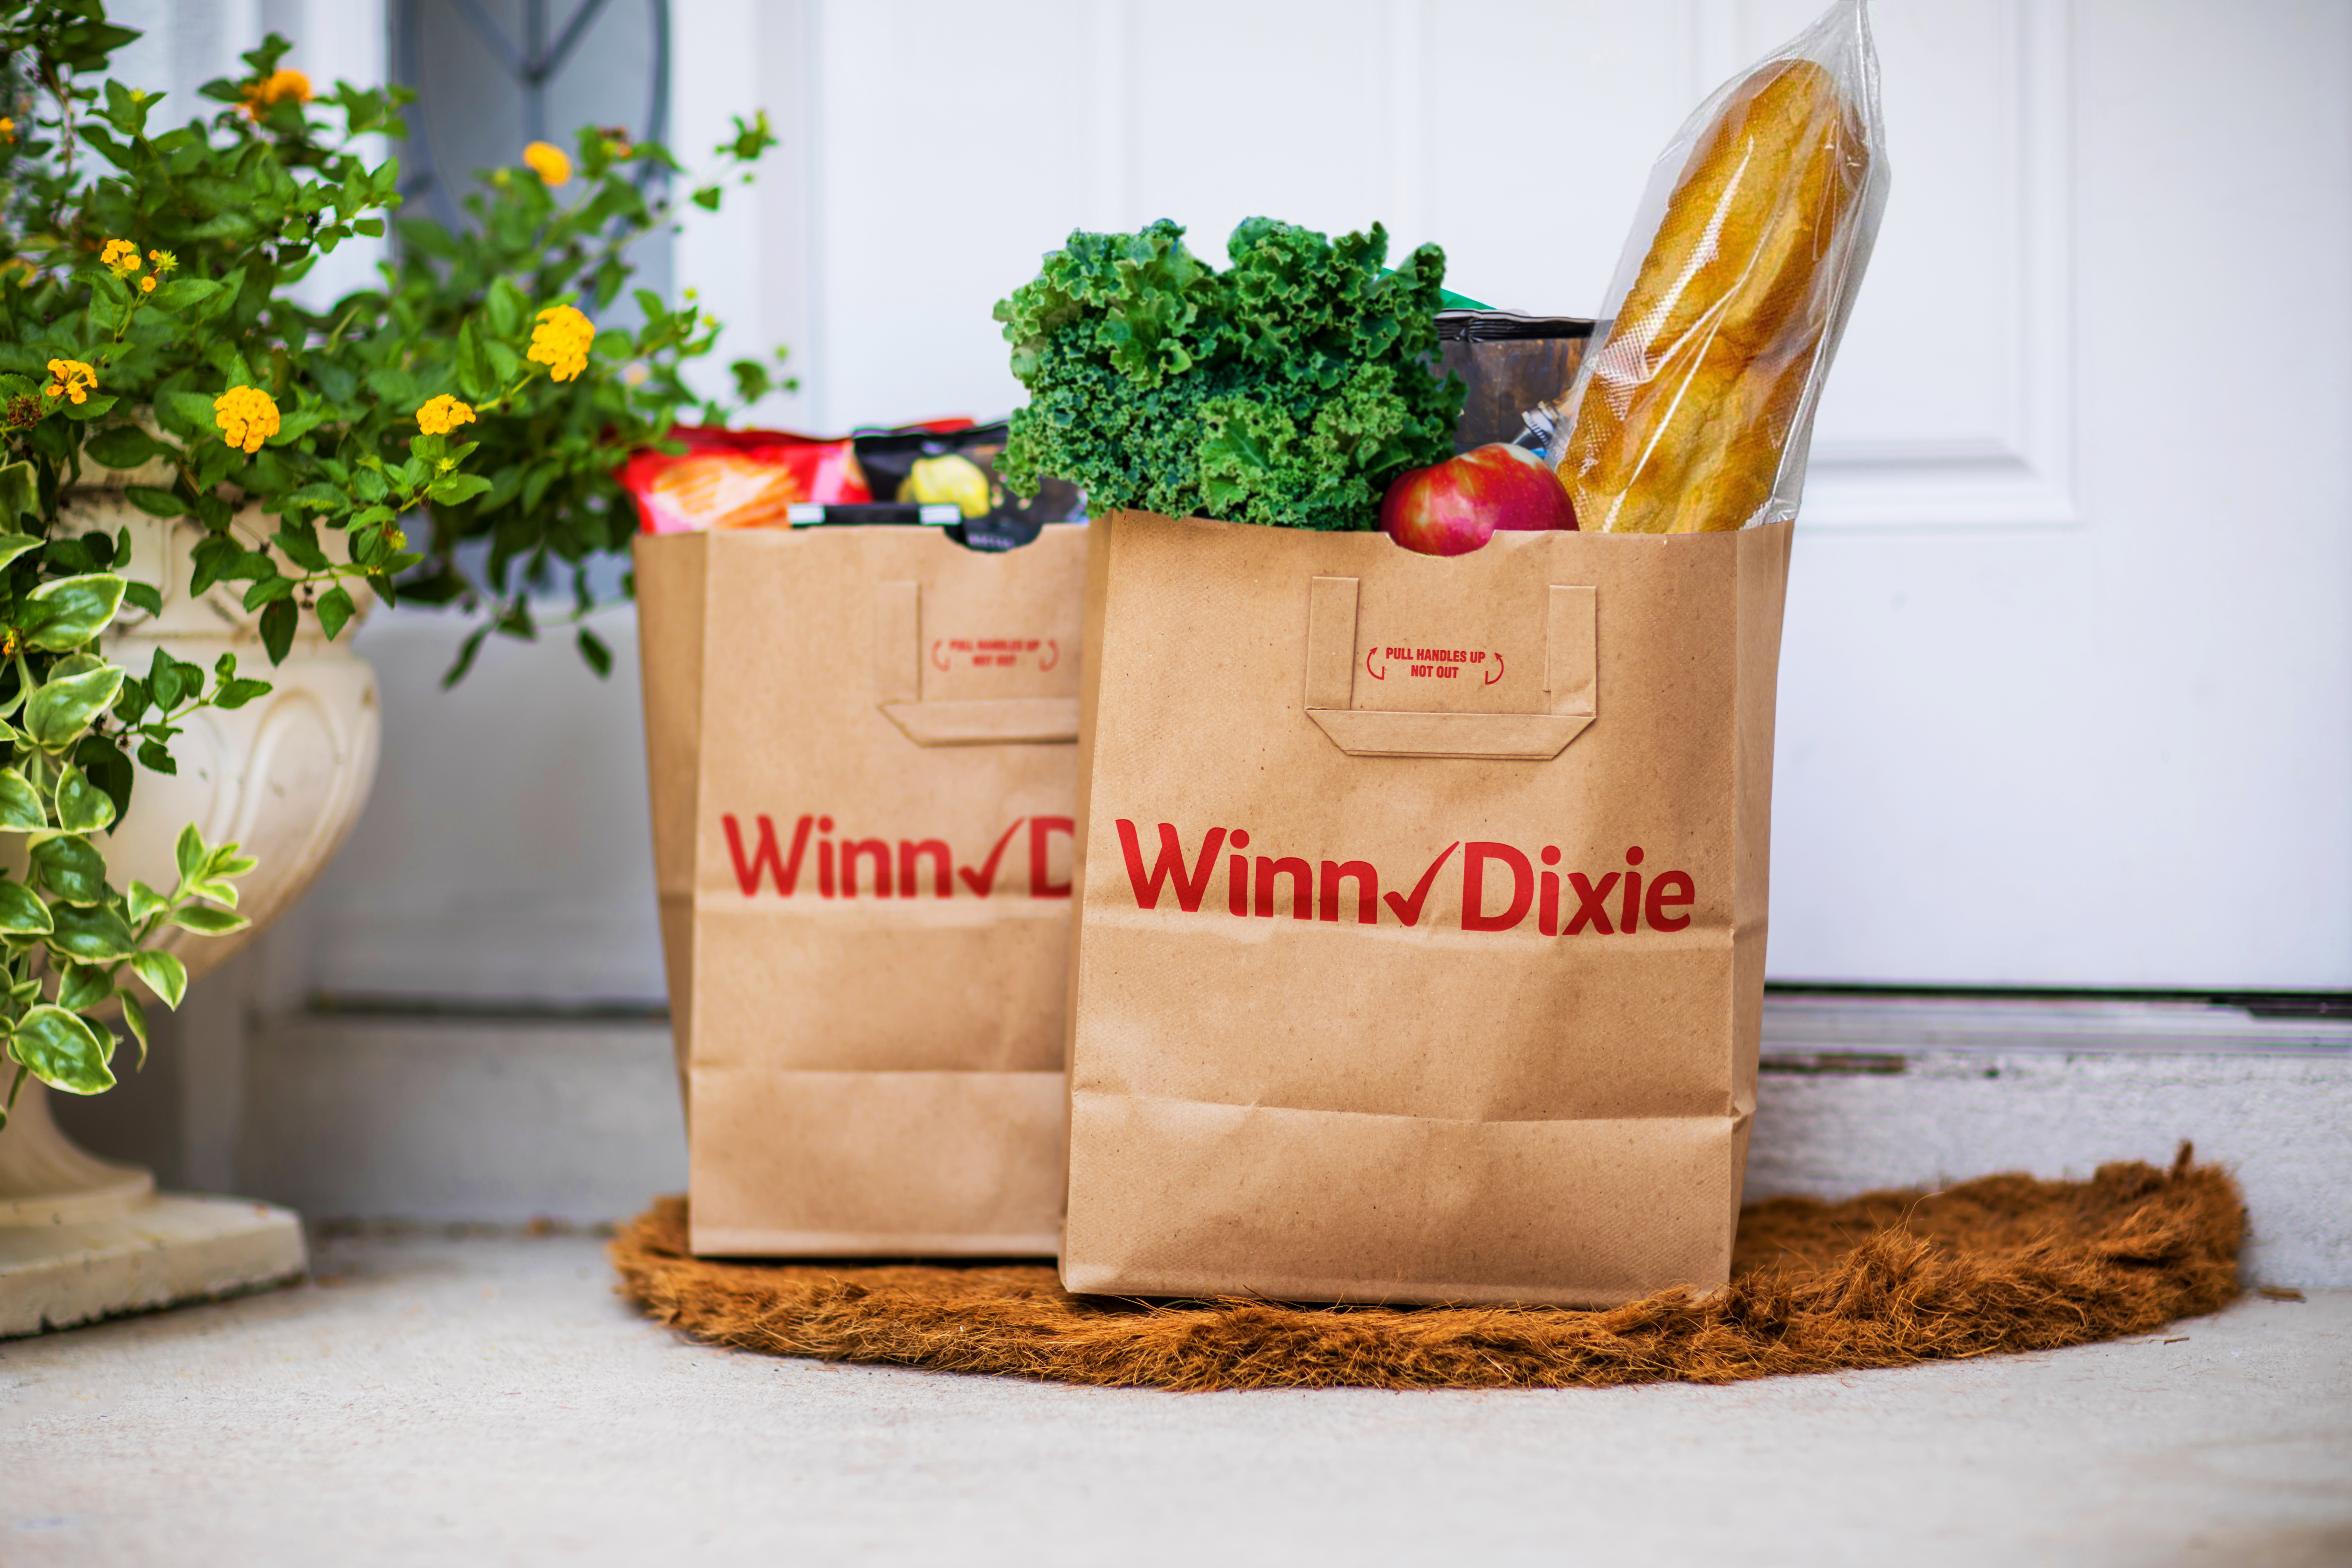 Southeastern Grocers to Debut Innovative Delivery and Curbside